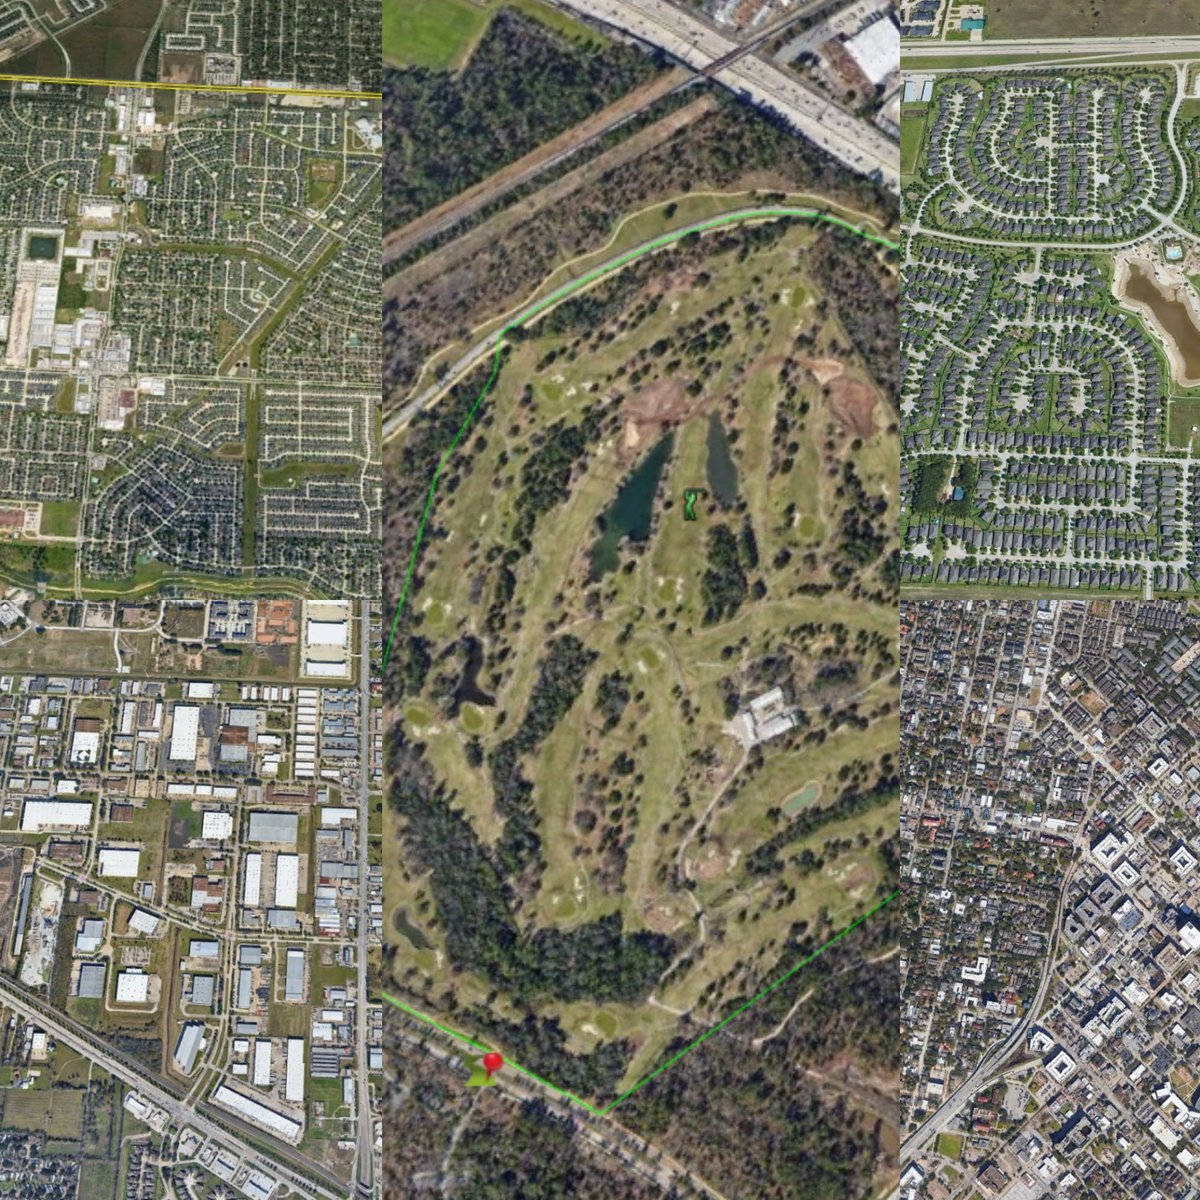 Something I noticed while on planes: when it comes to golf courses, landscape context matters. GC's are often connected to urban/suburban landscapes. This is why they have ecological value: they preserve green space amongst development.